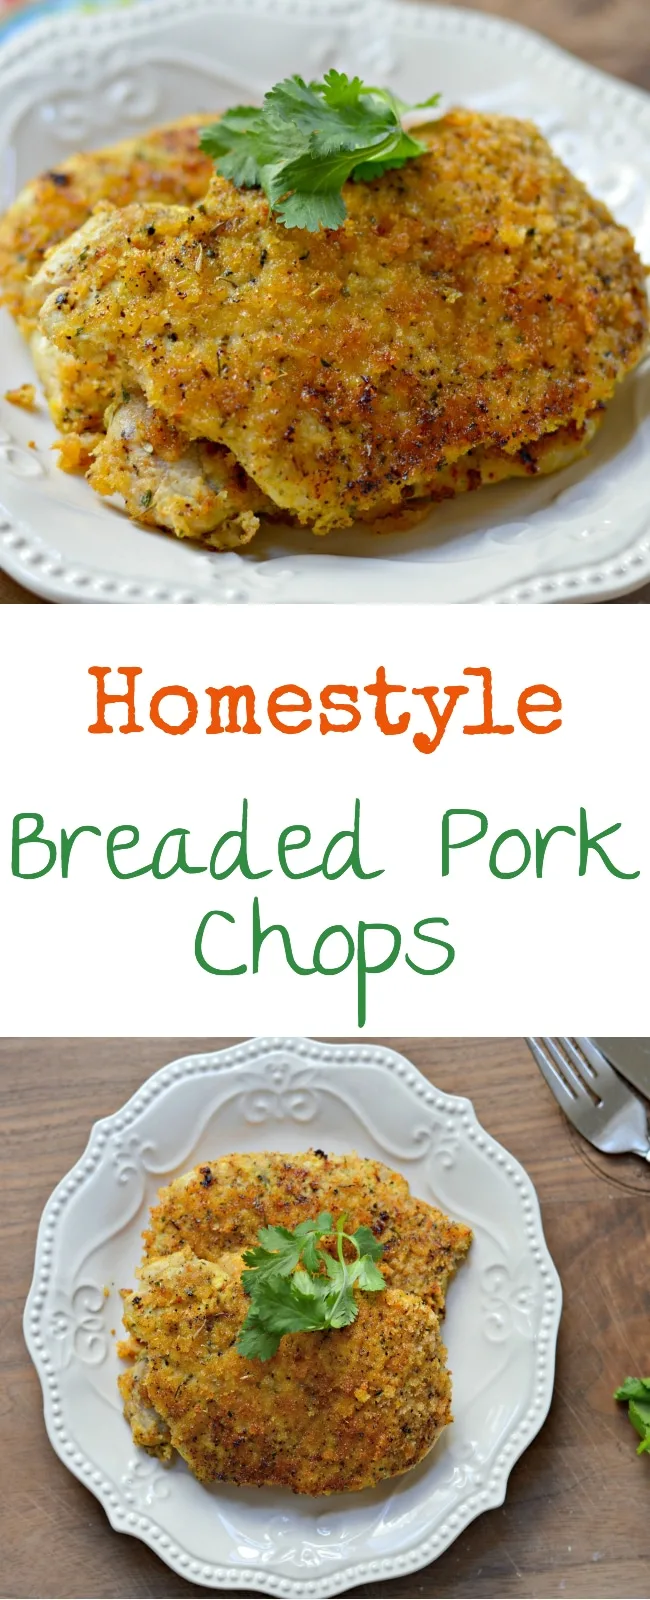 This homestyle breaded pork chops recipe has a delicious combination of herbs and spices and is a perfect choice for dinner.